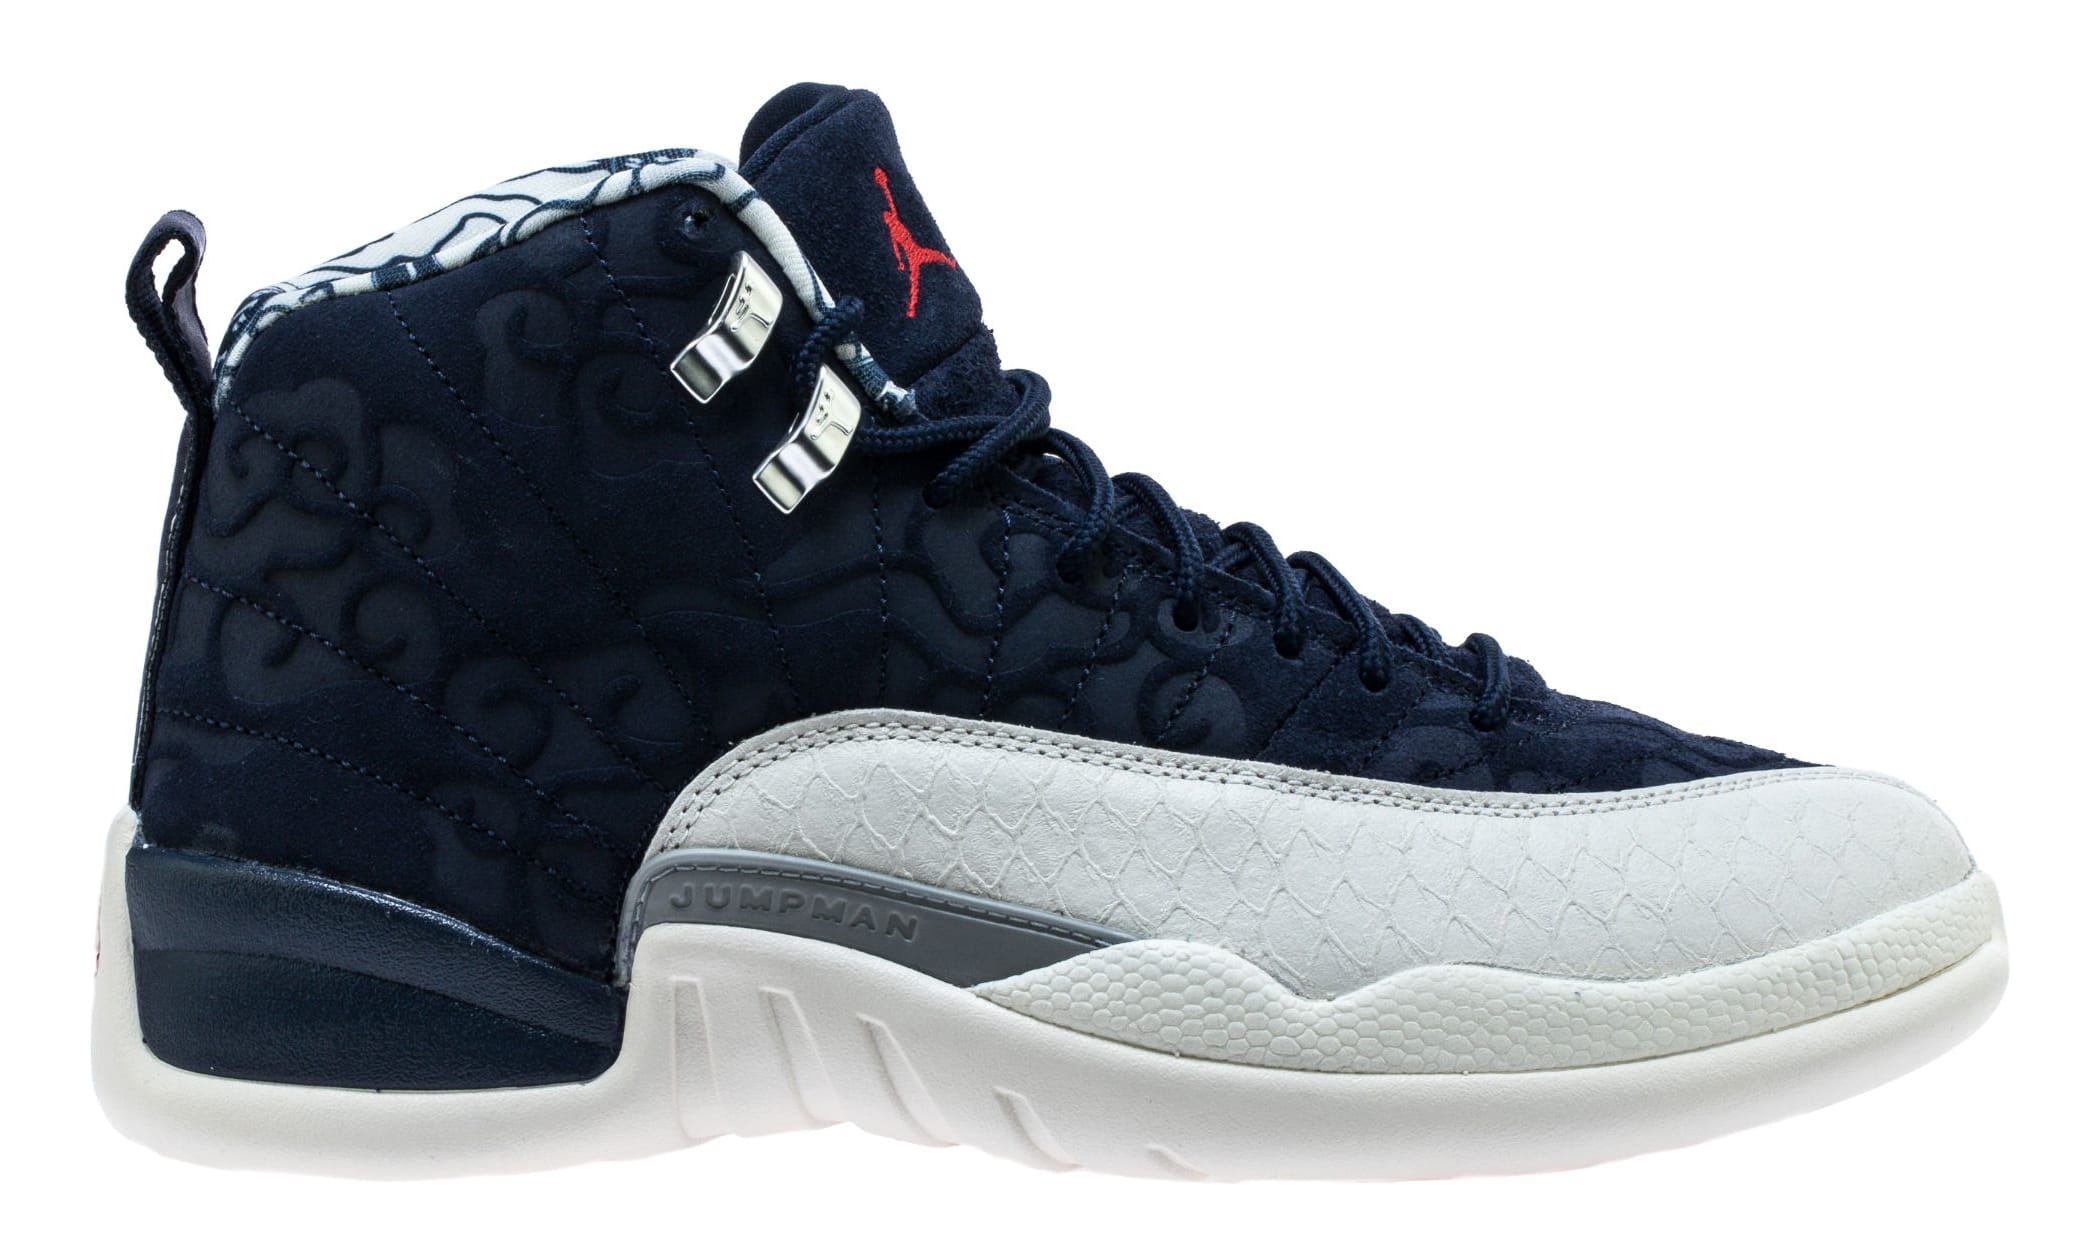 IetpShops - The Air Jordan 12 has been moved back to August 20th